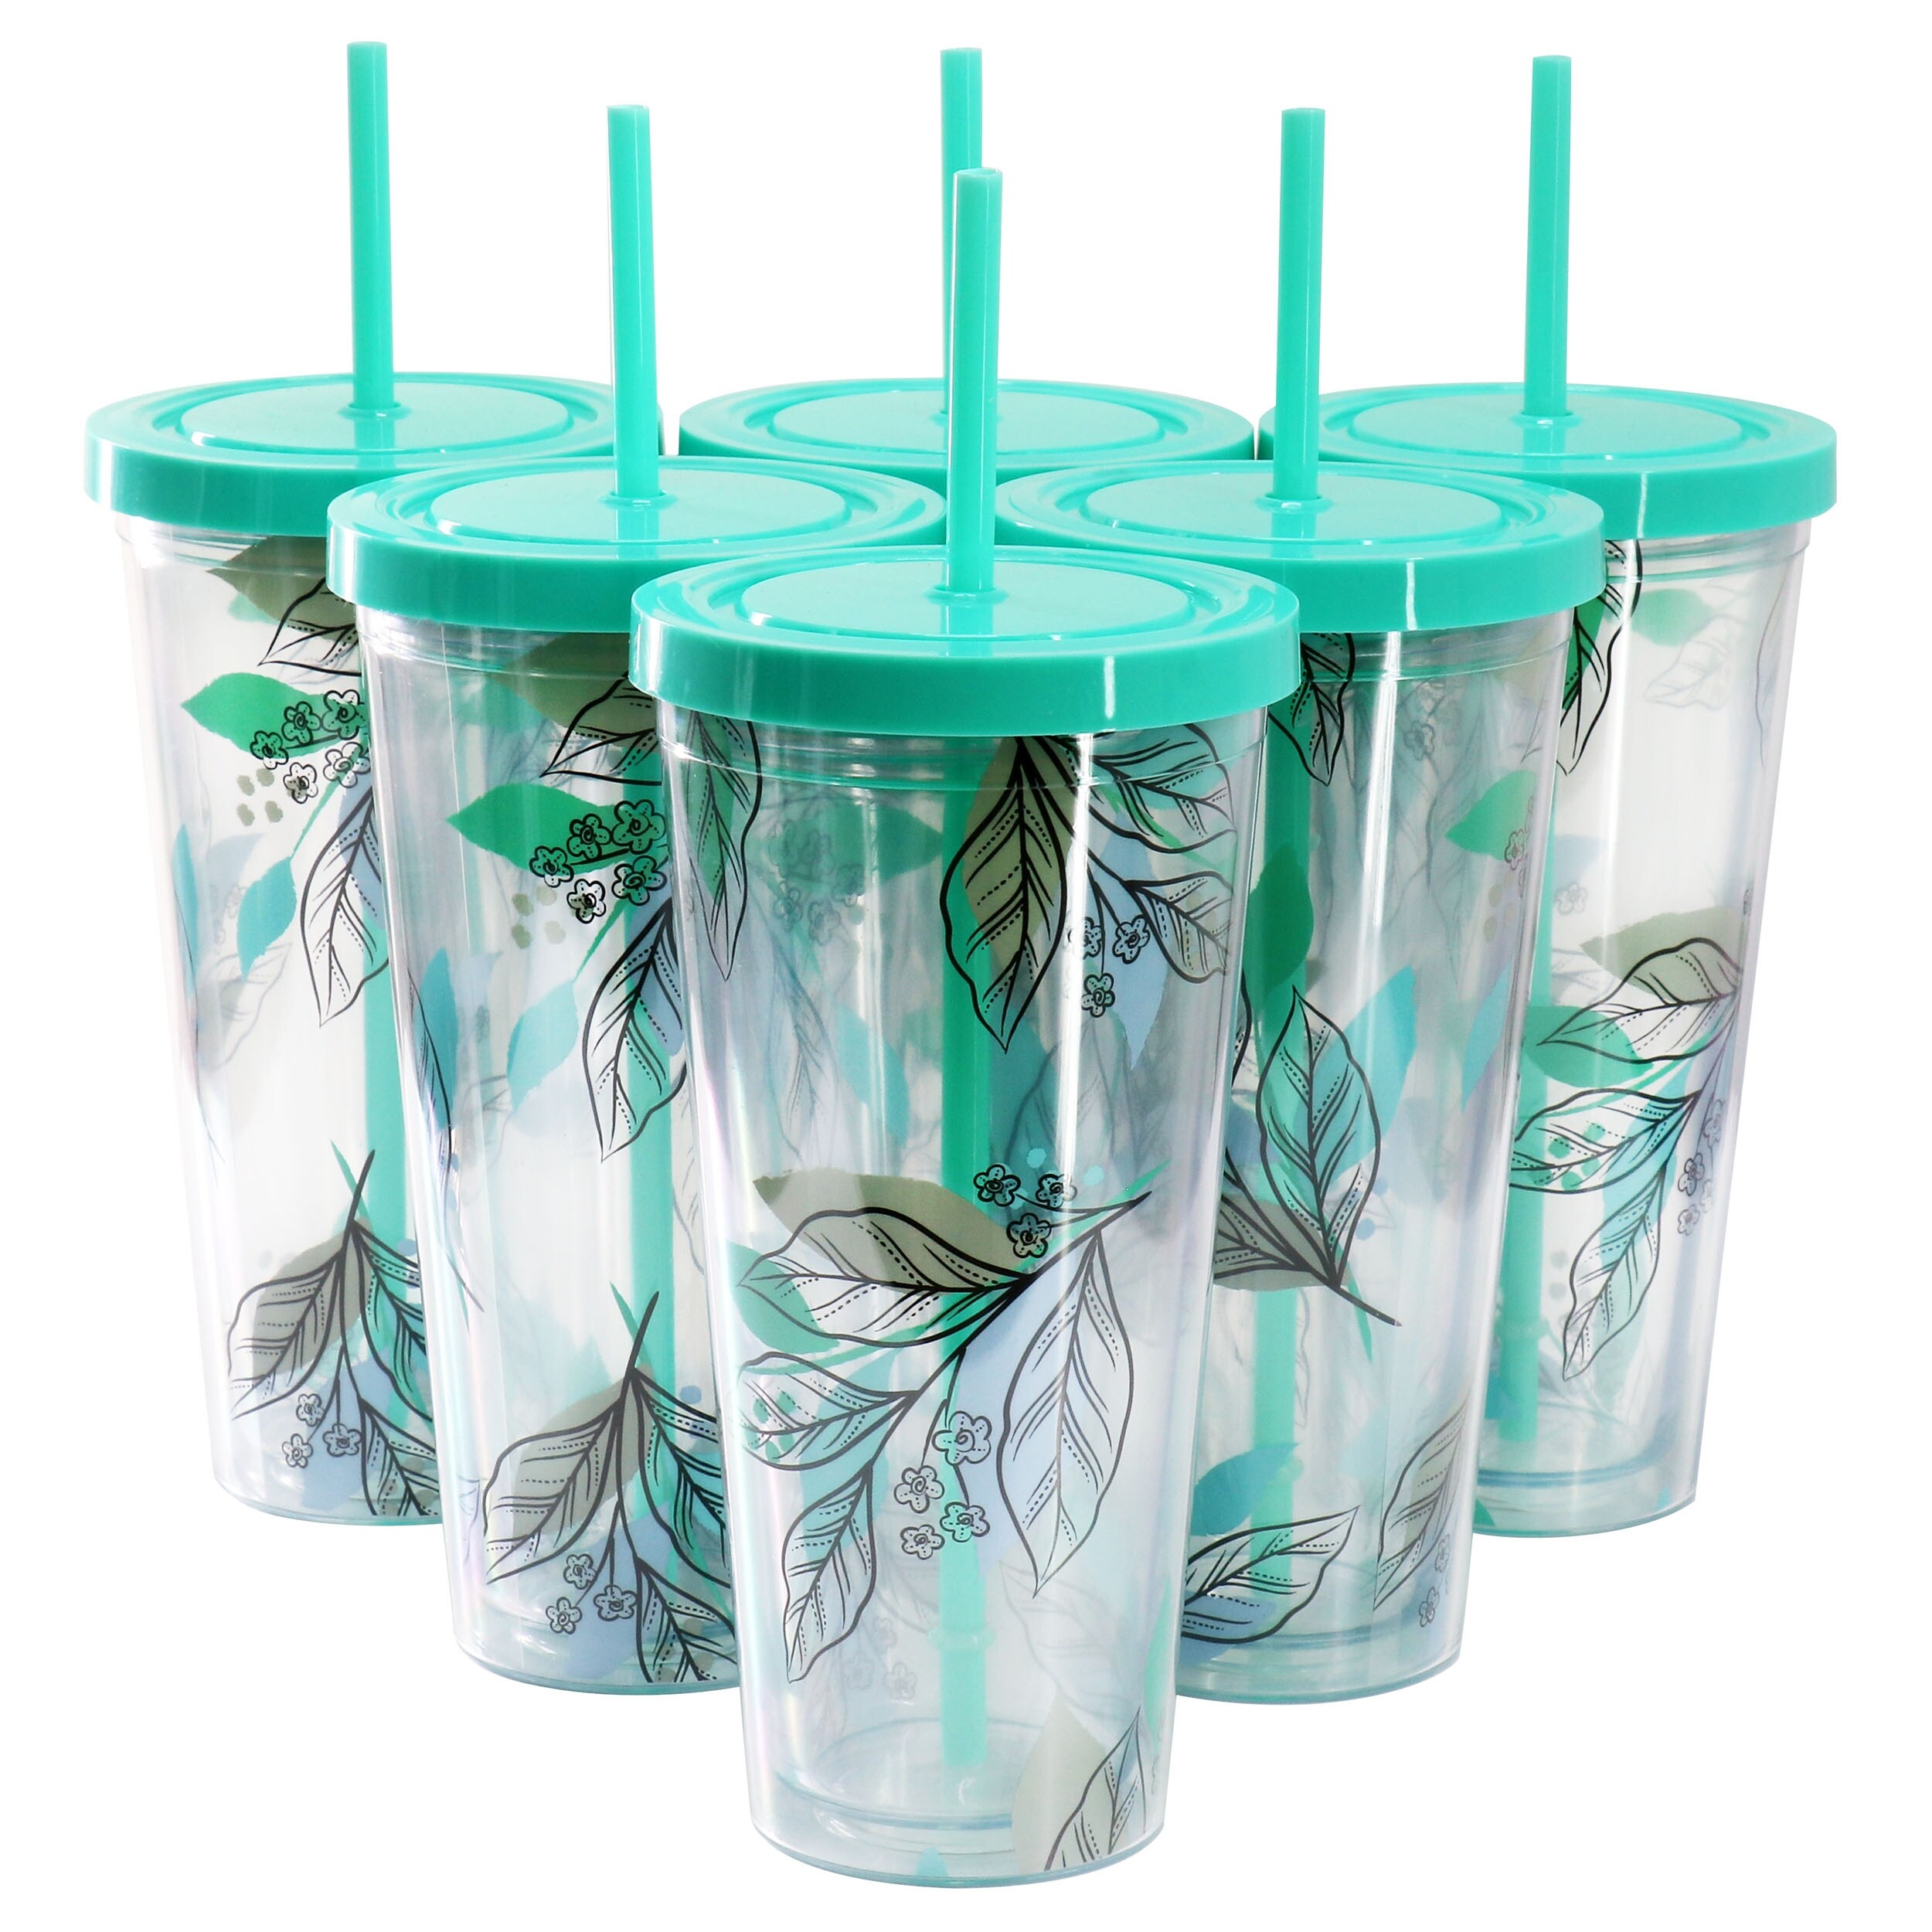 Gibson Home 6 Piece 24 Ounce Double Wall Plastic Tumbler Set in Teal